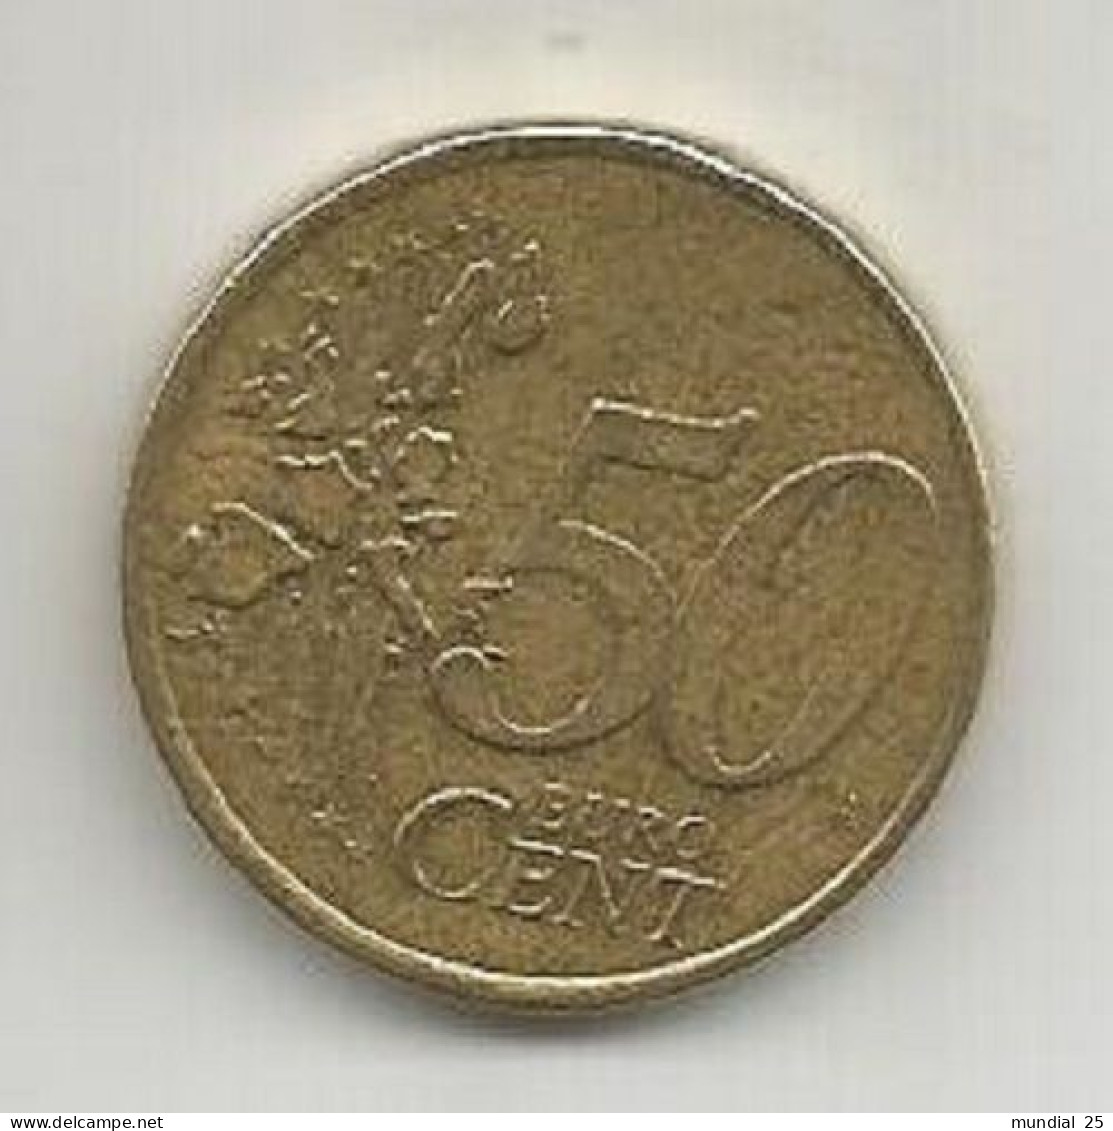 LUXEMBOURG 50 EURO CENT 2002 - Luxembourg